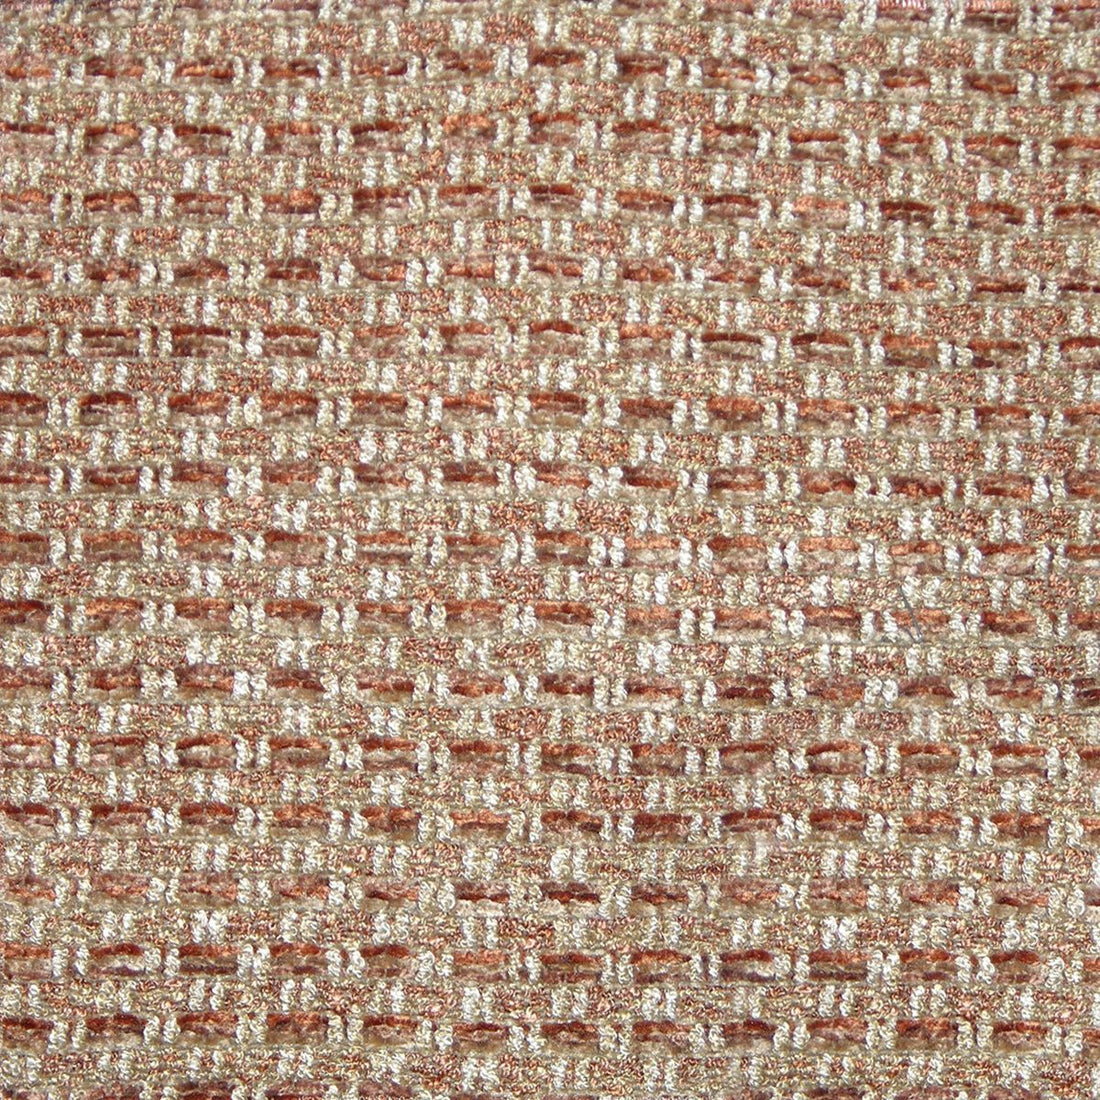 Jameson fabric in burnt sienna color - pattern number BQ 00215504 - by Scalamandre in the Old World Weavers collection